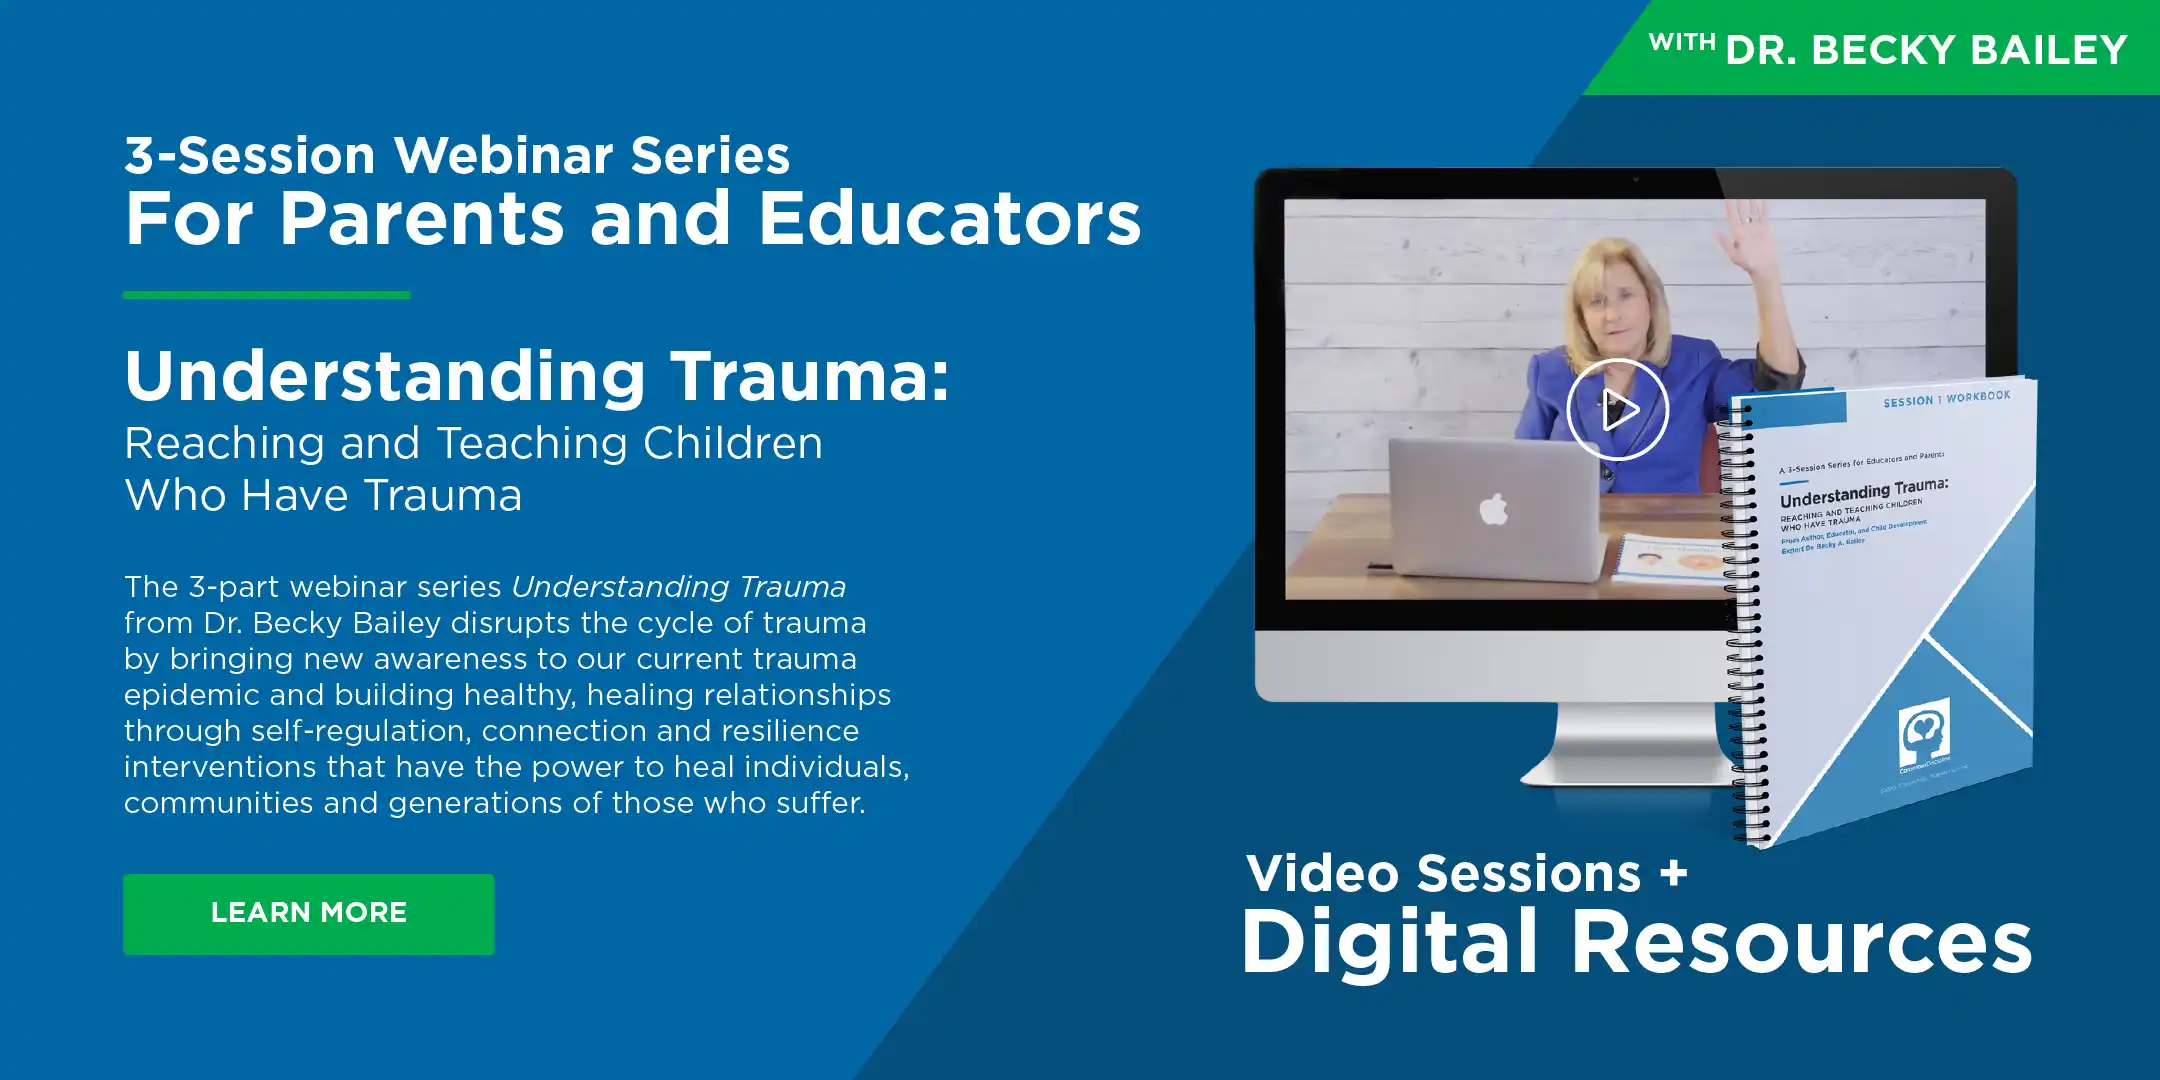 3-Session Webinar Series for Parents and Educators